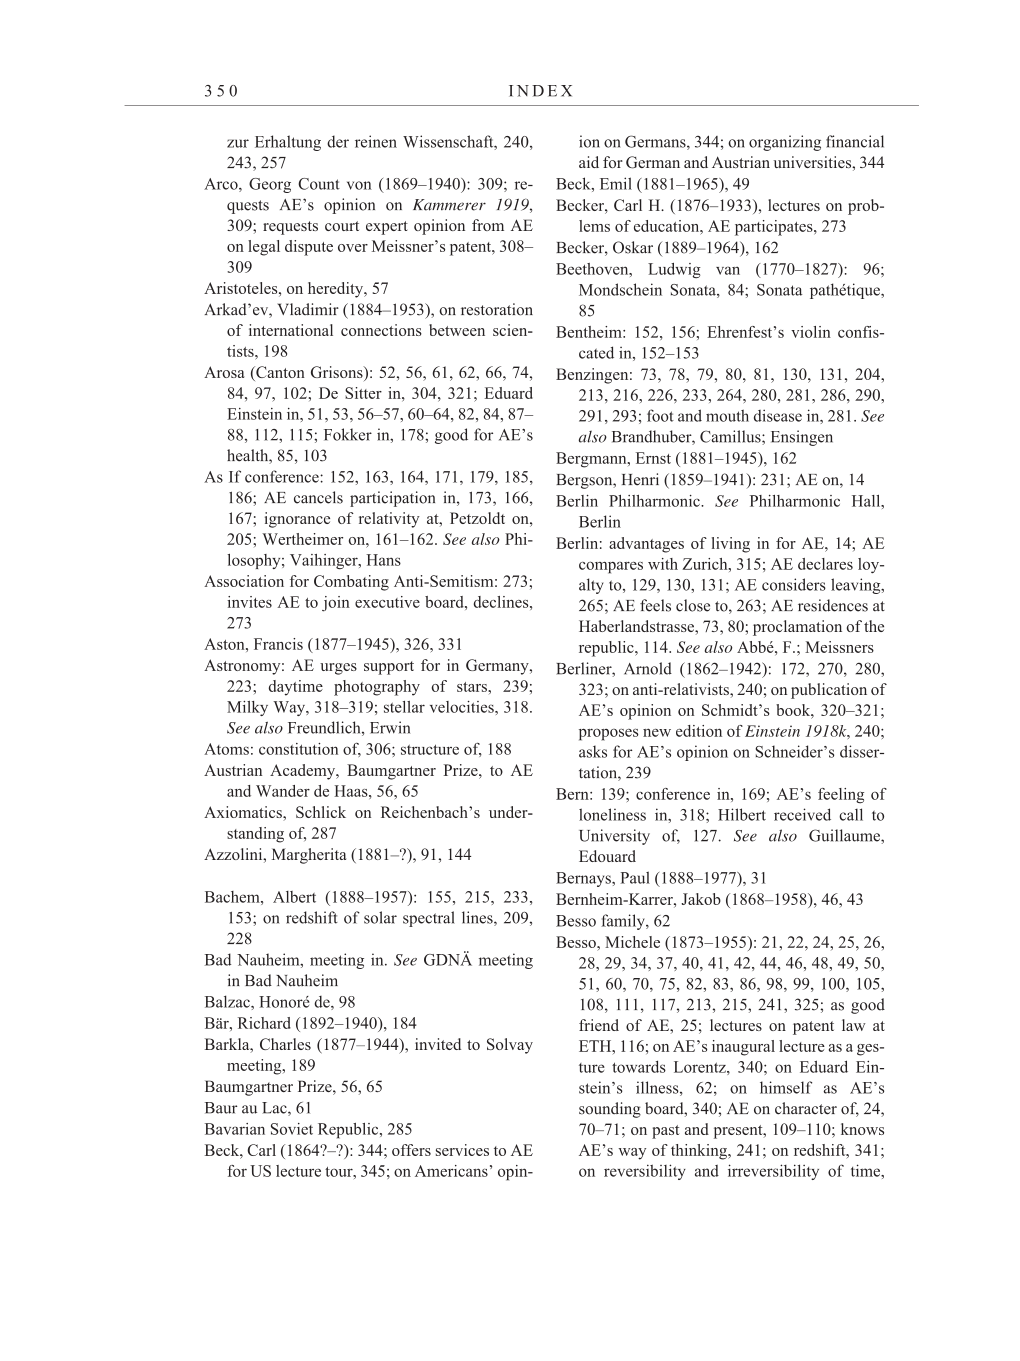 Volume 10: The Berlin Years: Correspondence, May-December 1920, and Supplementary Correspondence, 1909-1920 (English translation supplement) page 350